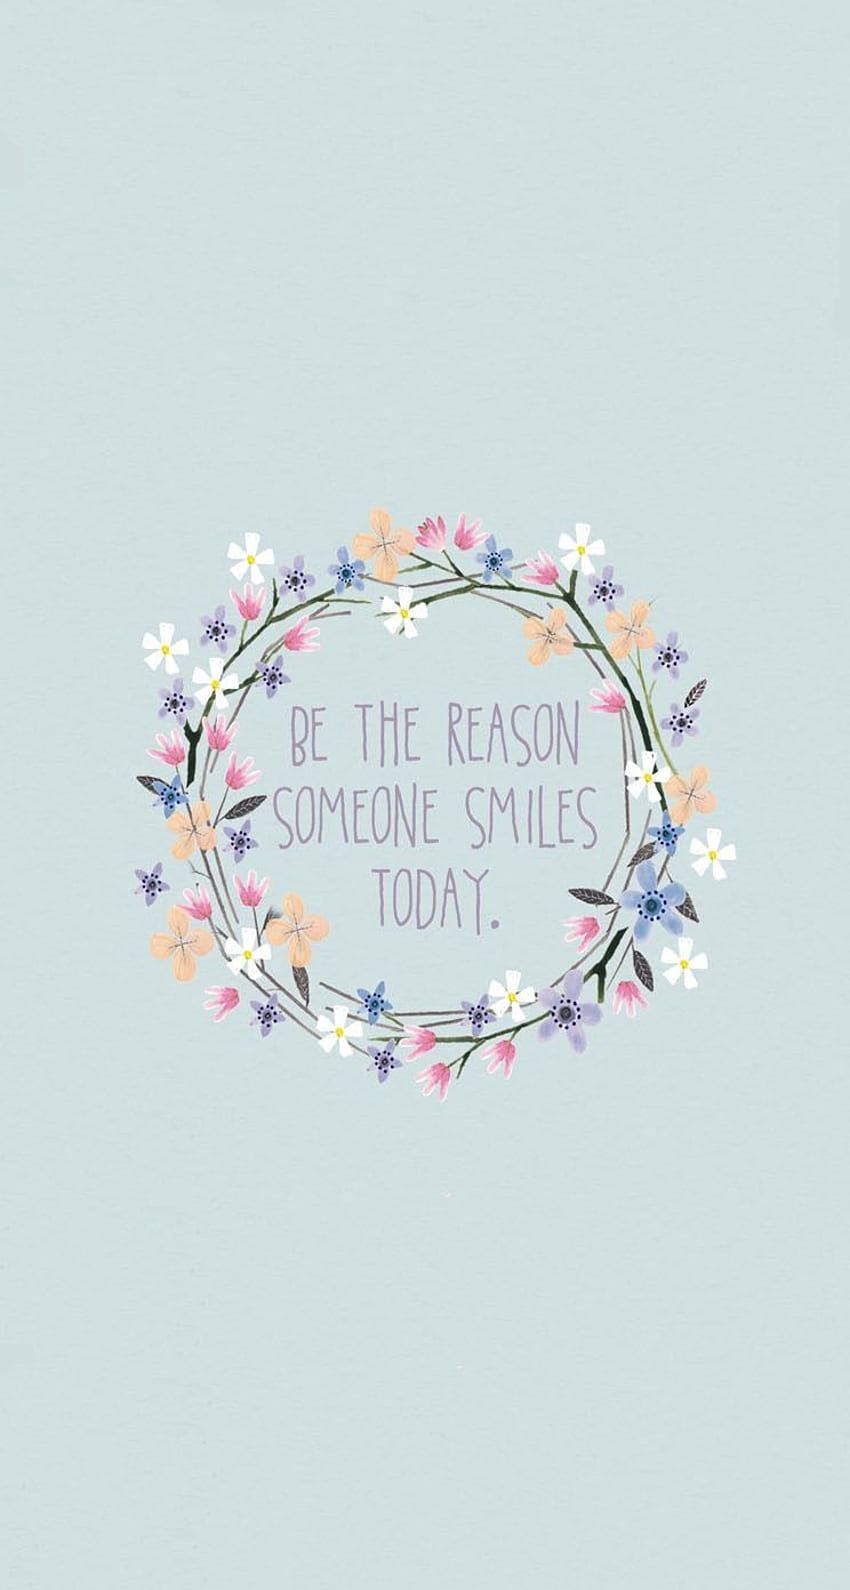 Be the reason someone smiles today - Dance